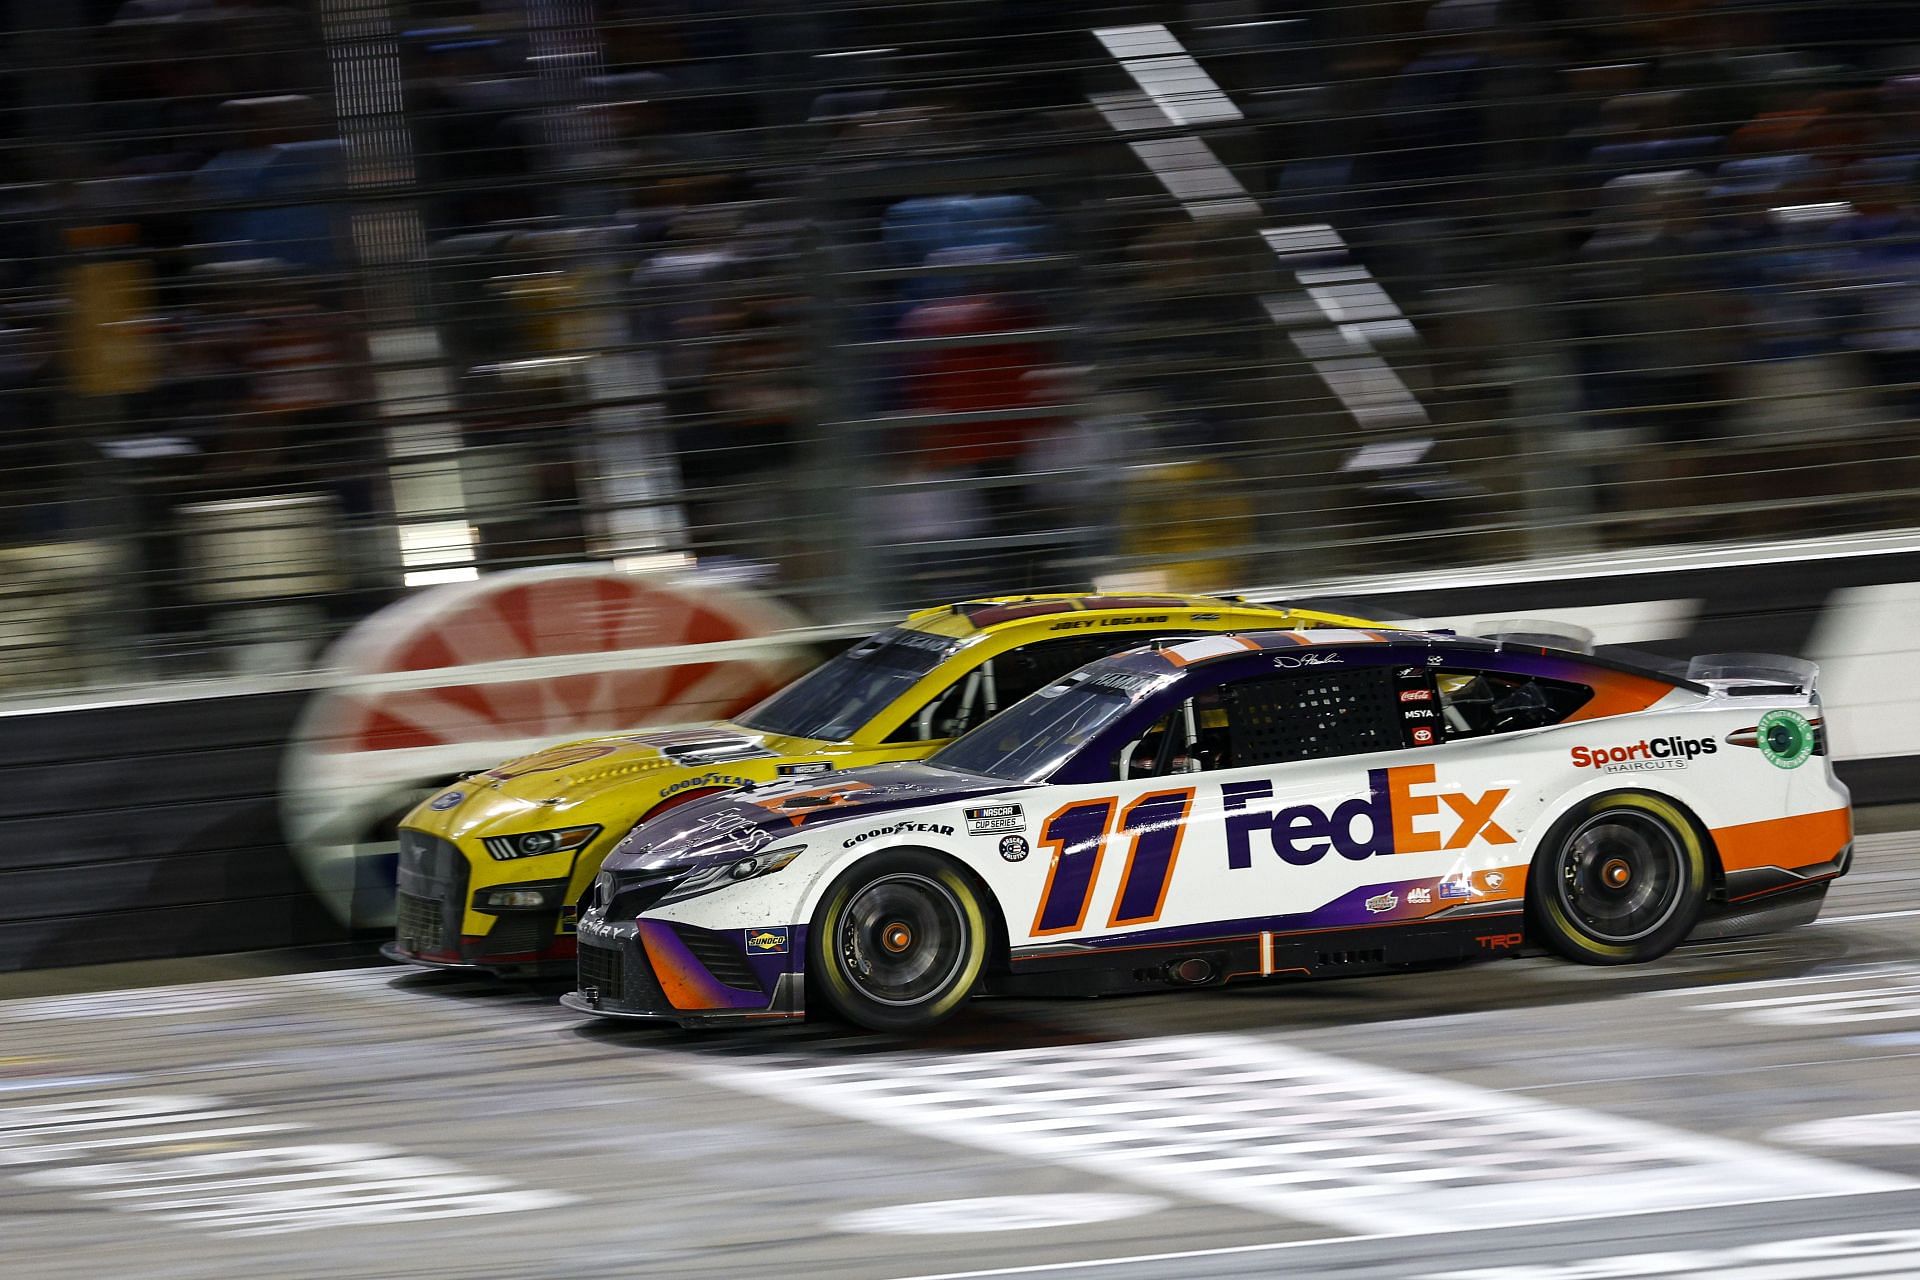 Denny Hamlin drives during the NASCAR Cup Series All-Star Race at Texas Motor Speedway (Photo by Jared C. Tilton/Getty Images)